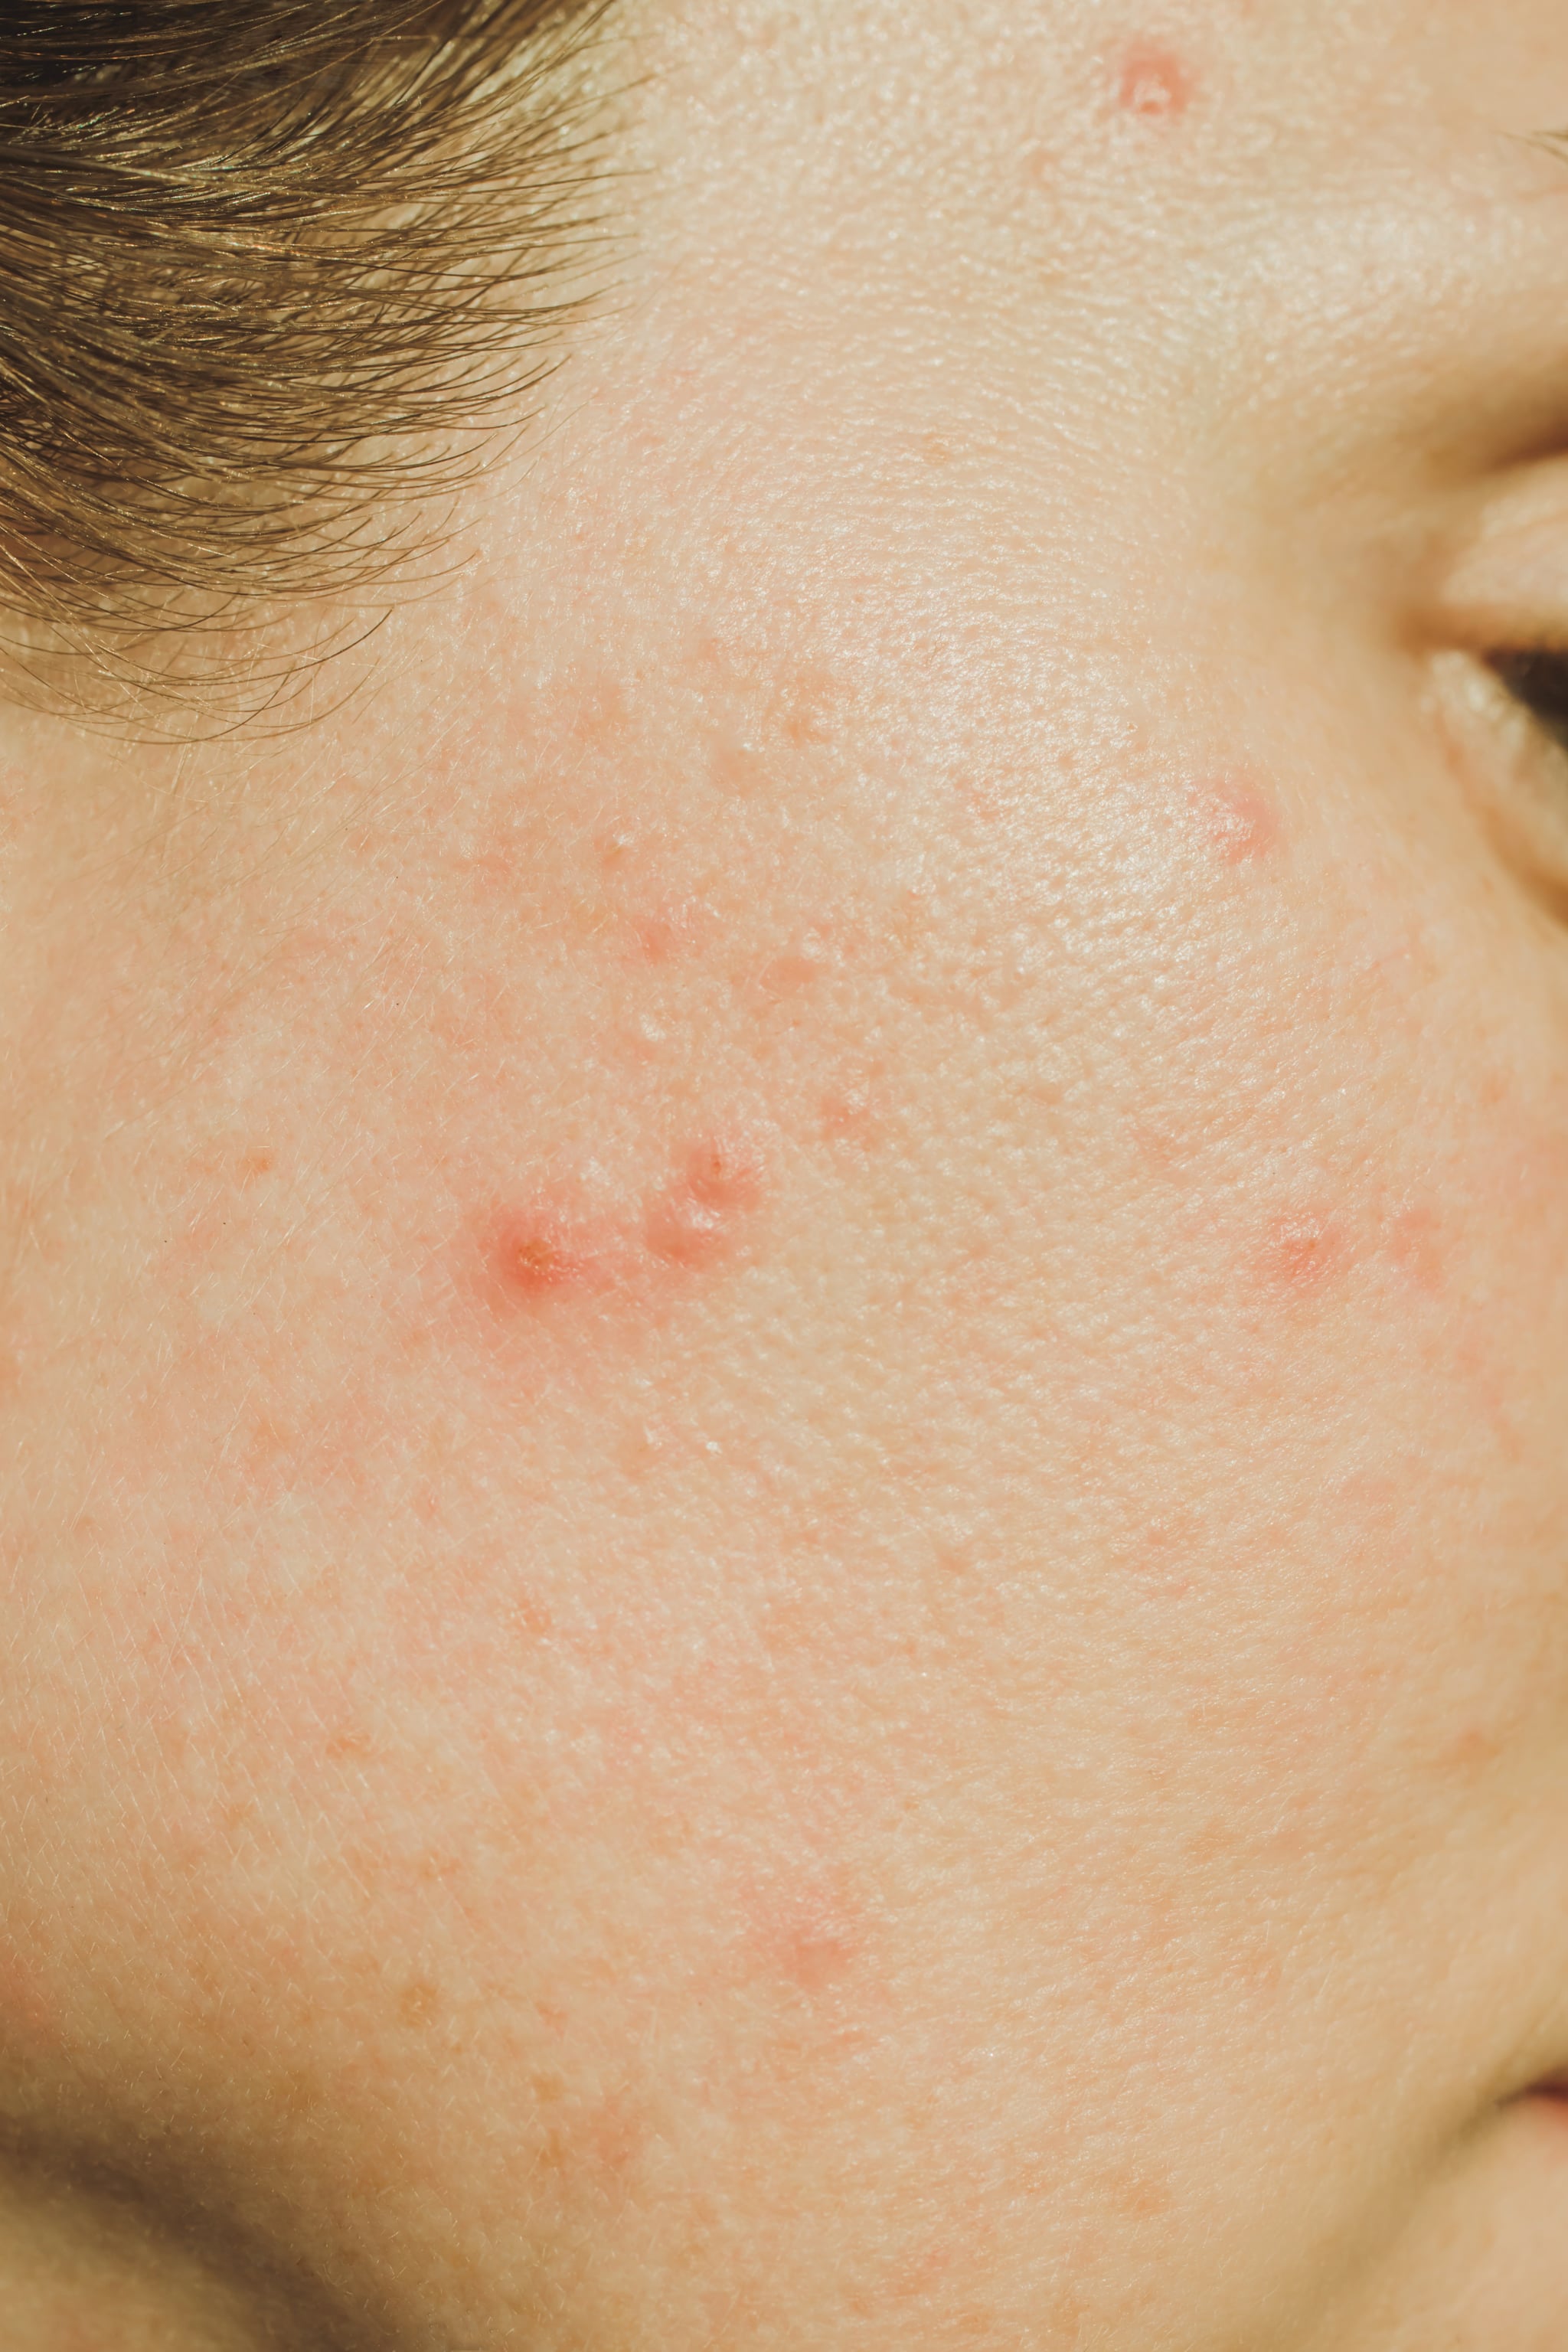 Adult acne closeup of skin with pimples and blemishes.